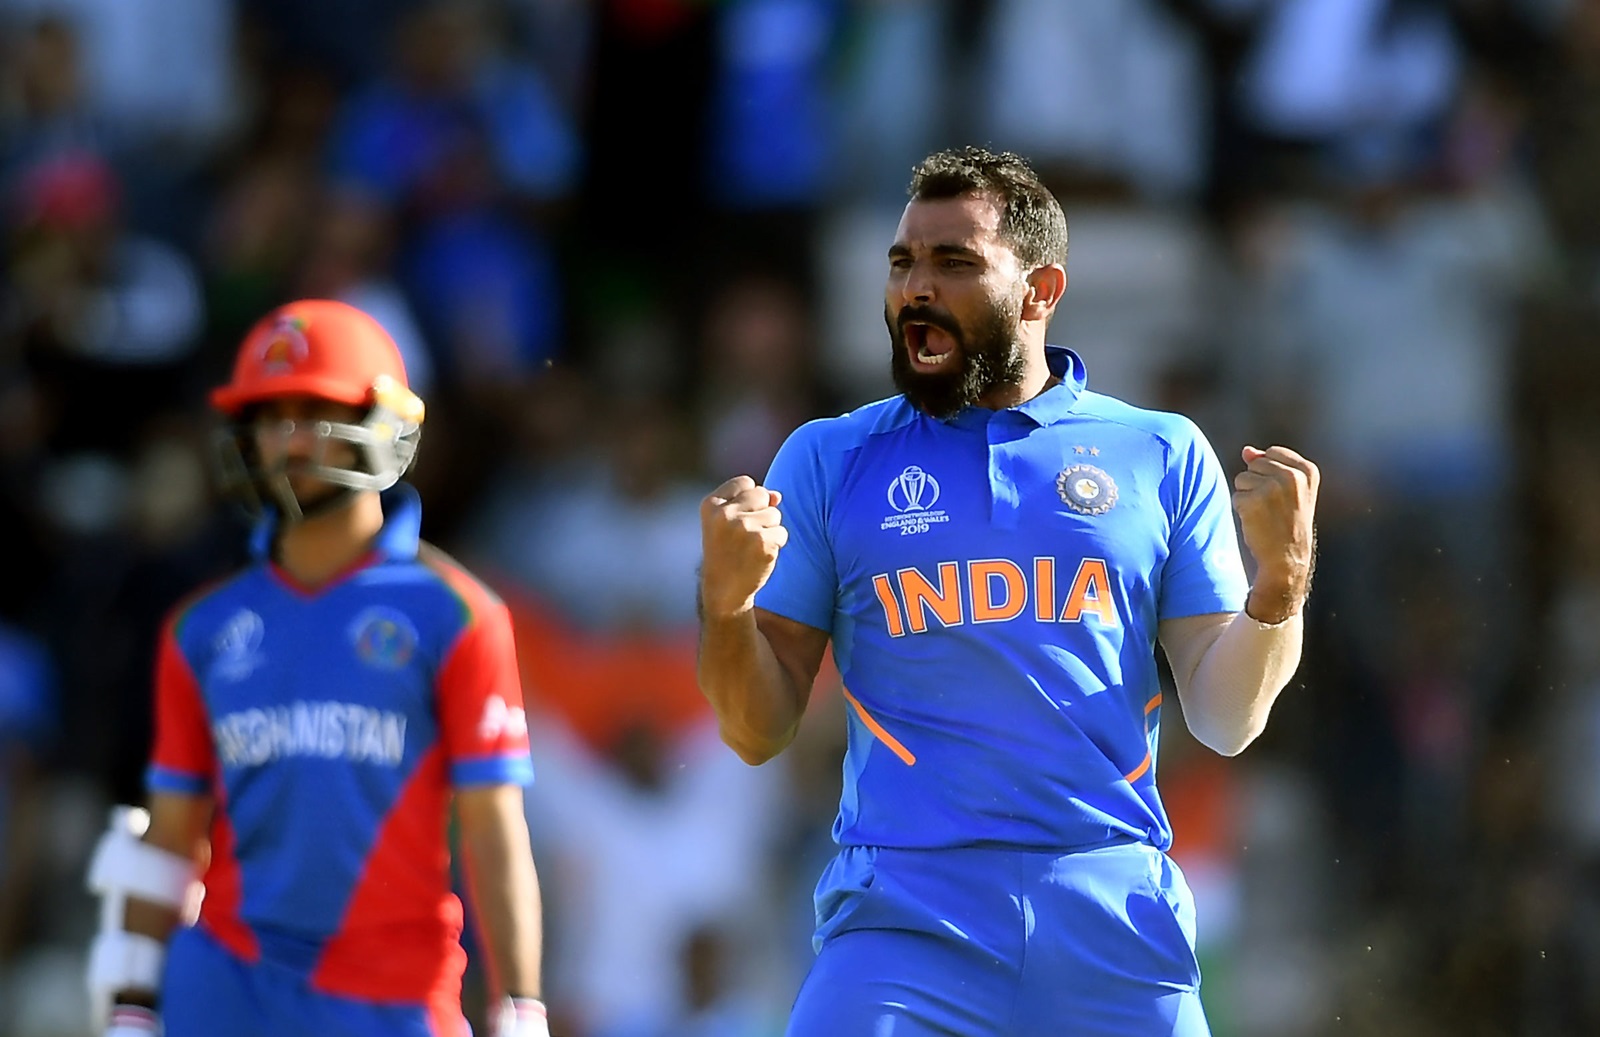 Mohammad Shami's hat-trick was the second one by an Indian in World Cup | Getty